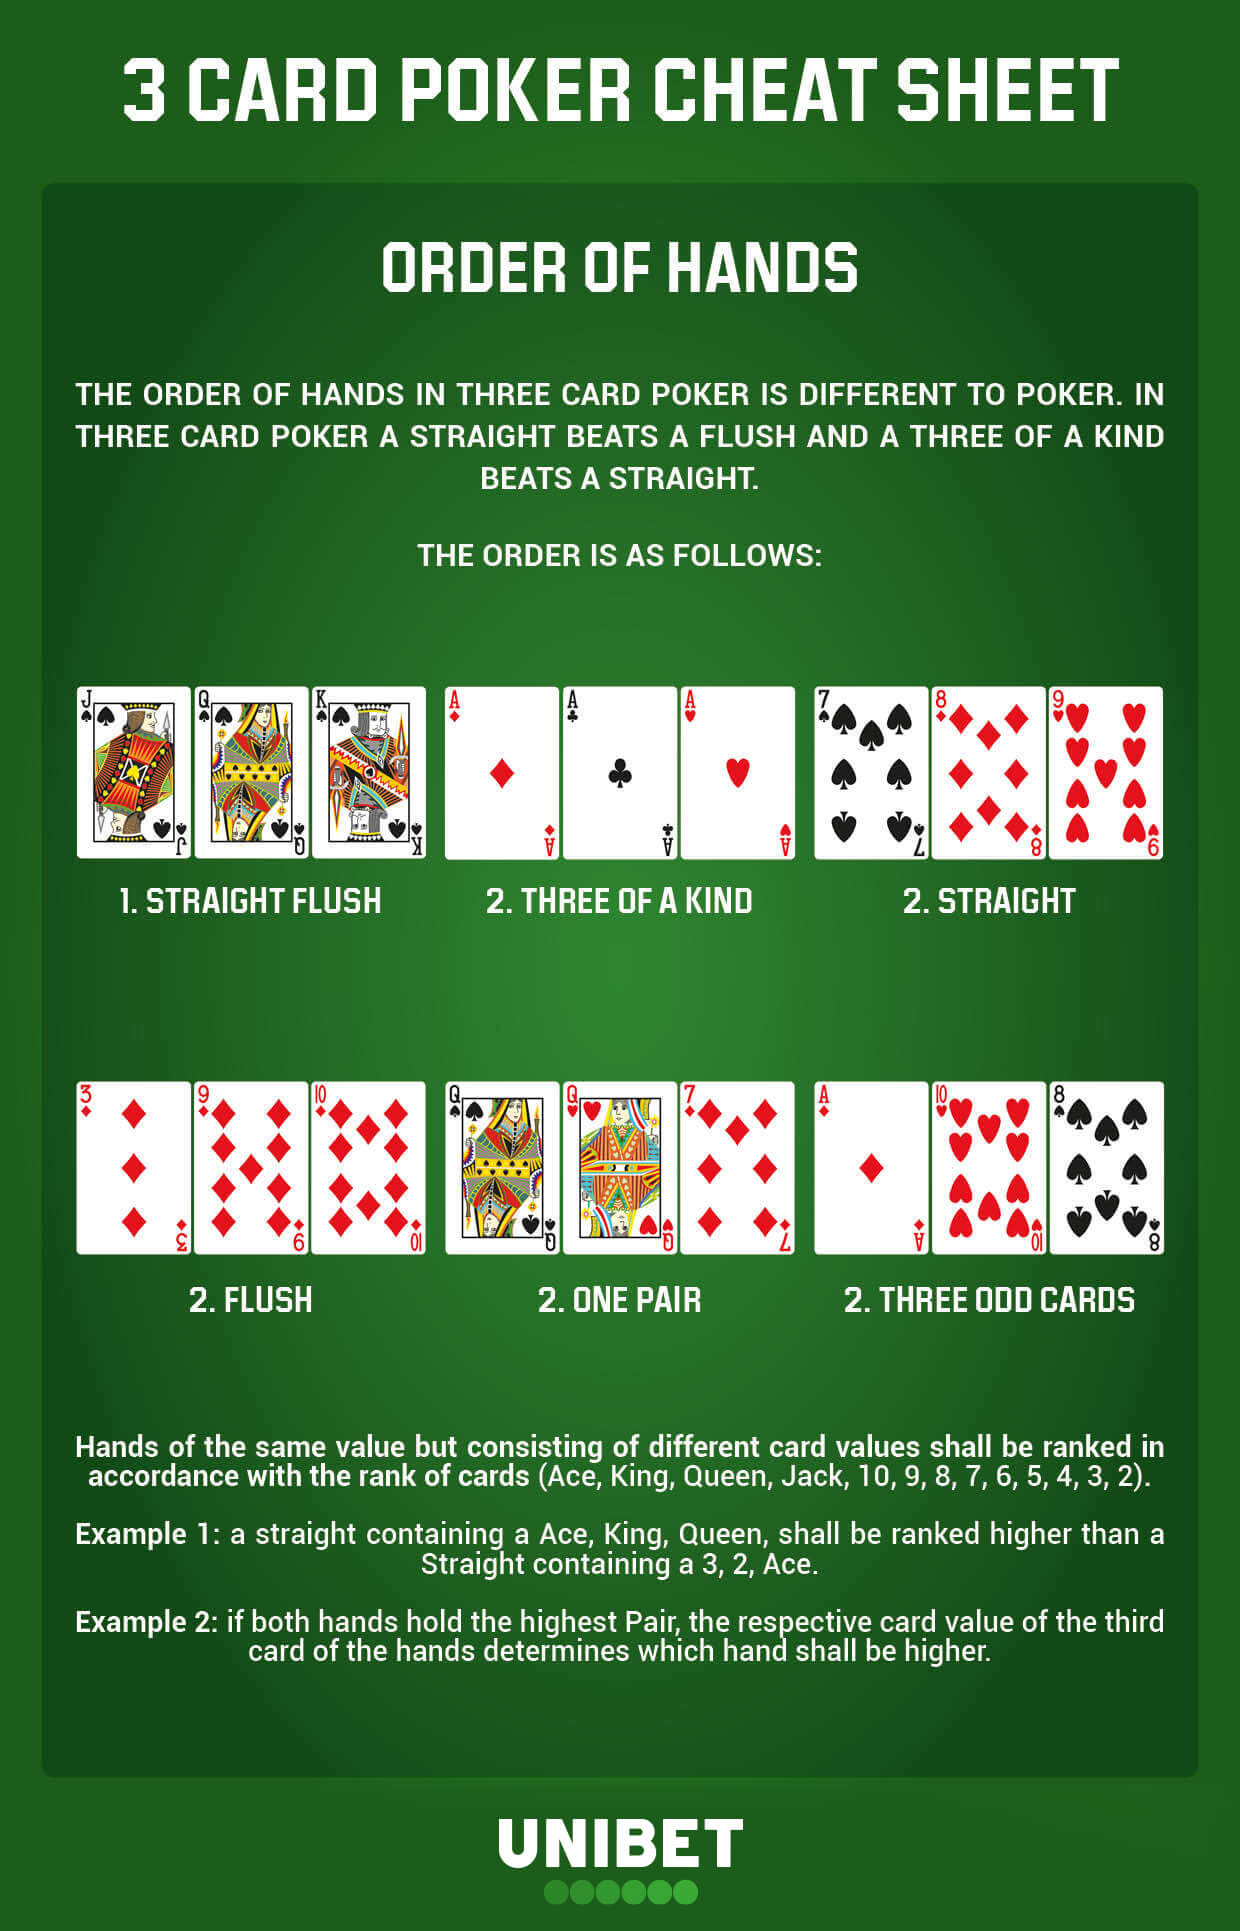 How many cards are dealt in Three Card Poker?